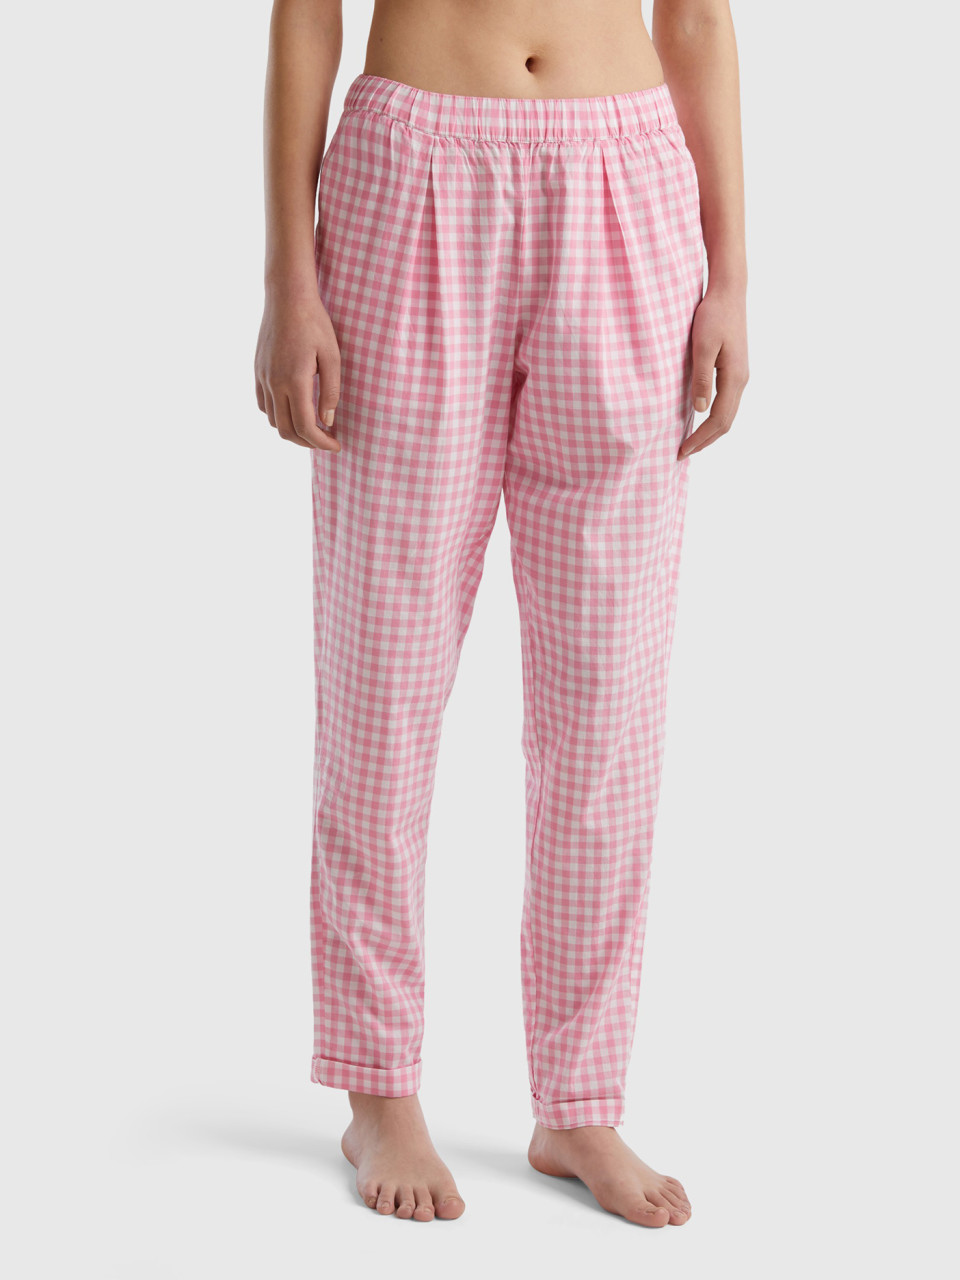 Benetton, Trousers With Vichy Check Pattern, Pink, Women